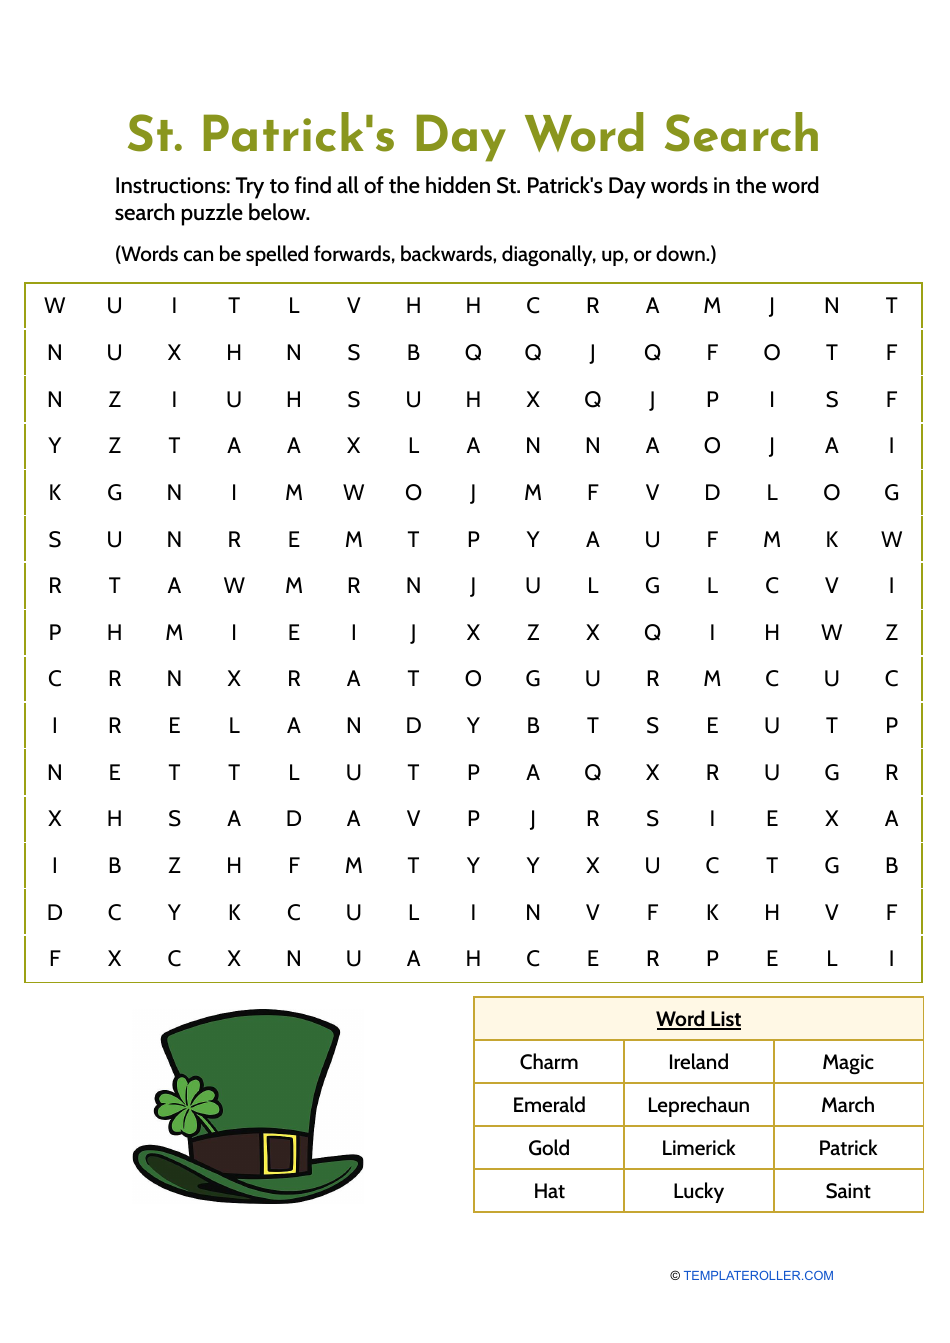 St. Patrick's Day Word Search shown with hats